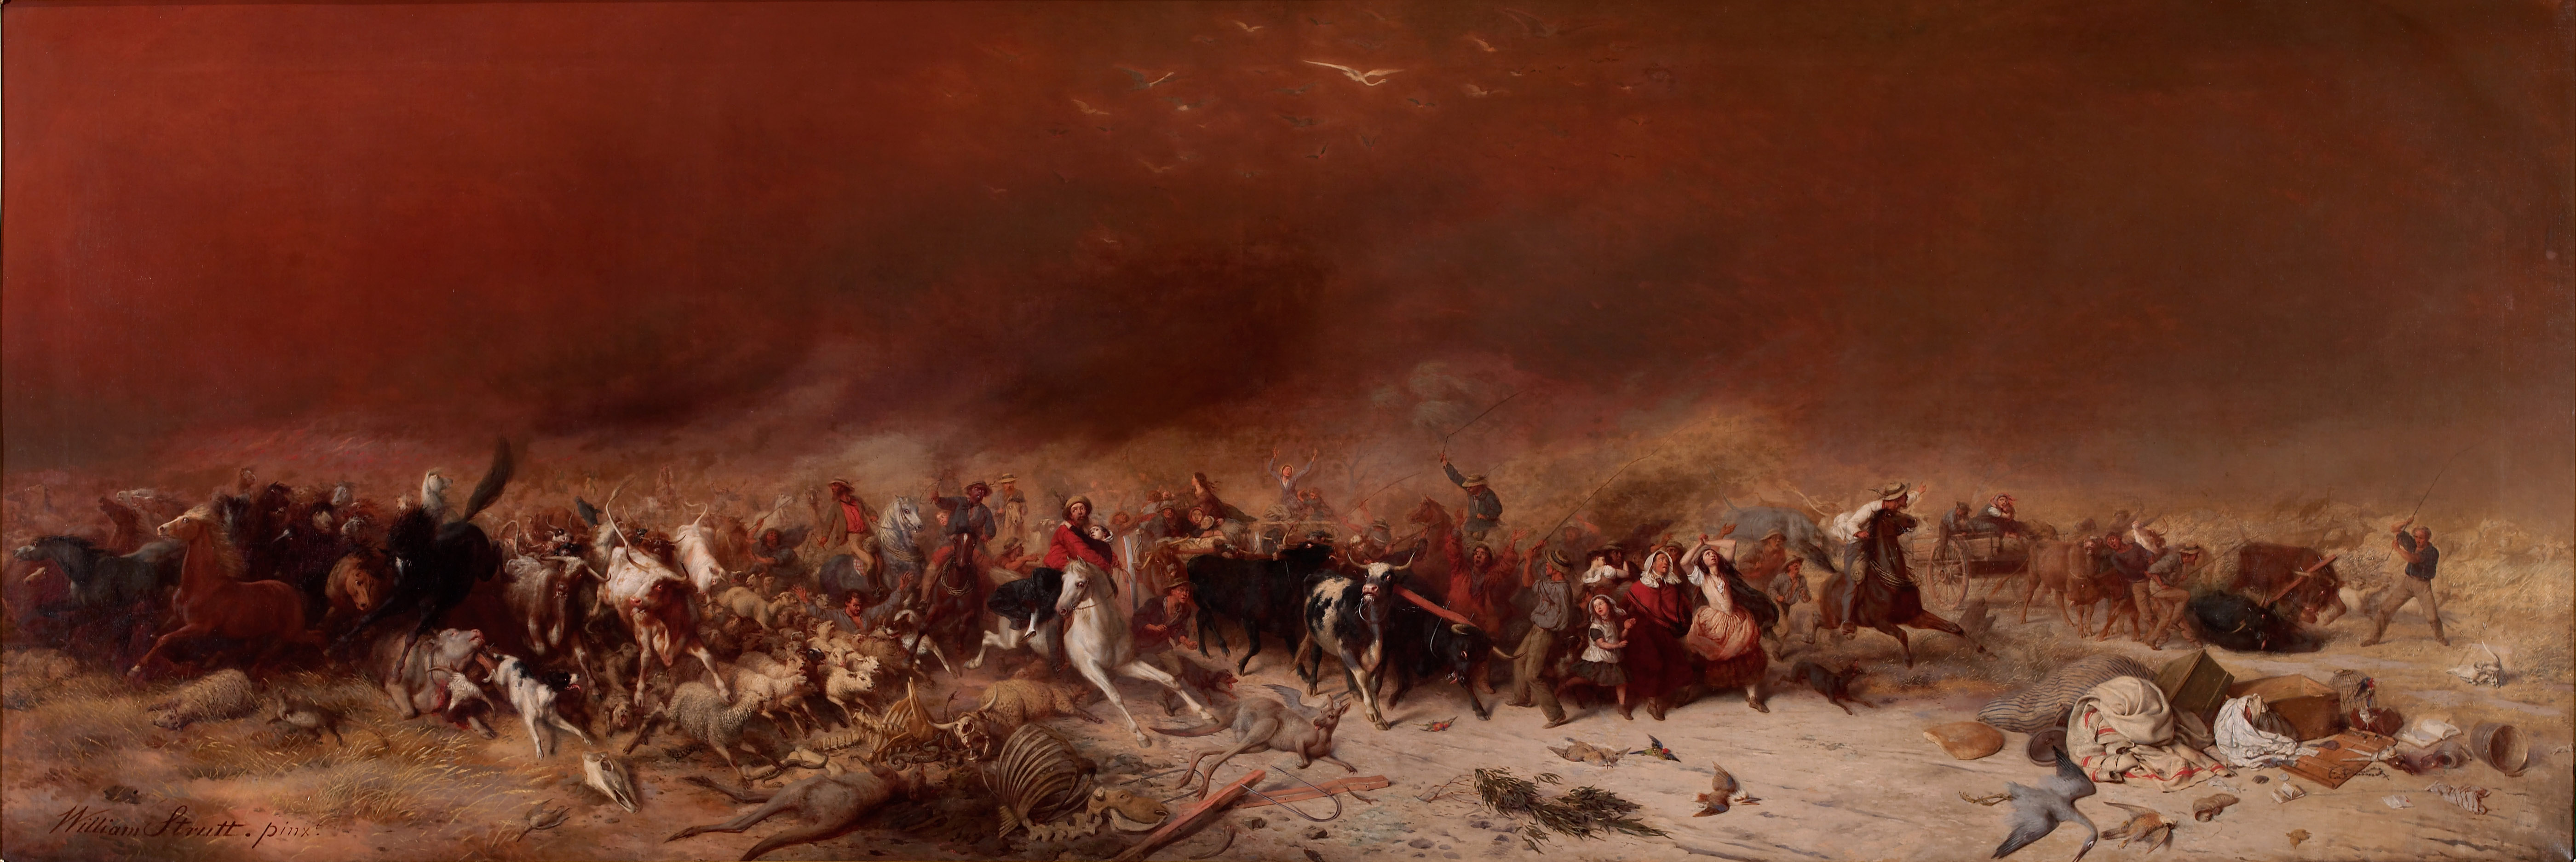 panoramic painting of people and livestock fleeing a catastrophic bush fire